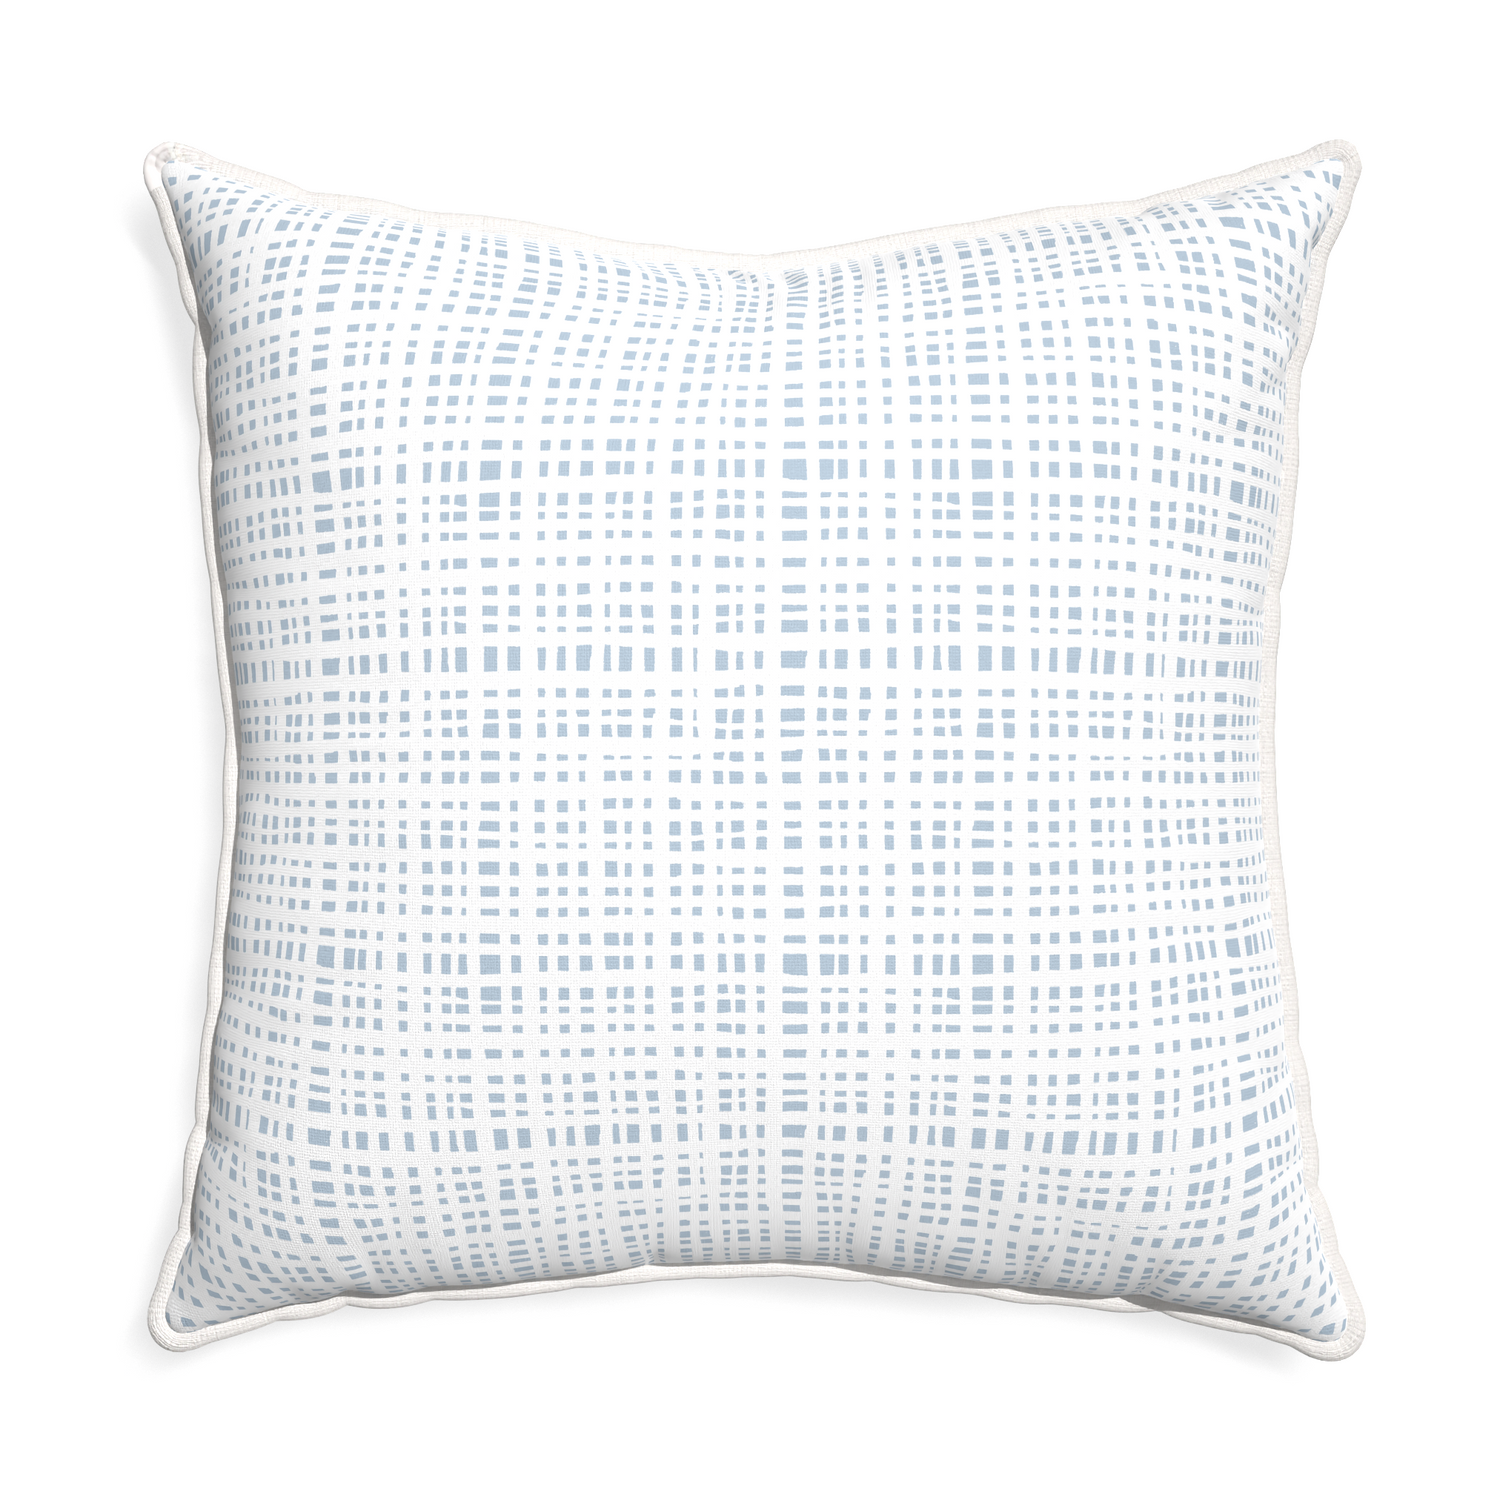 Euro-sham ginger sky custom pillow with snow piping on white background